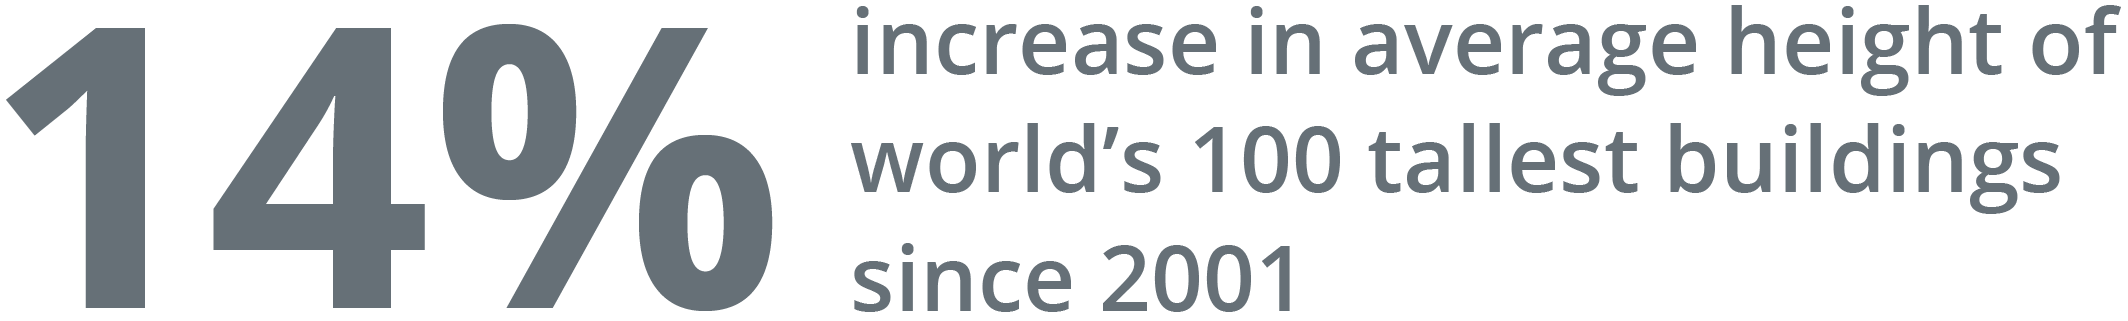 14% increase in average height of world's 100 tallest buildings since 2001.